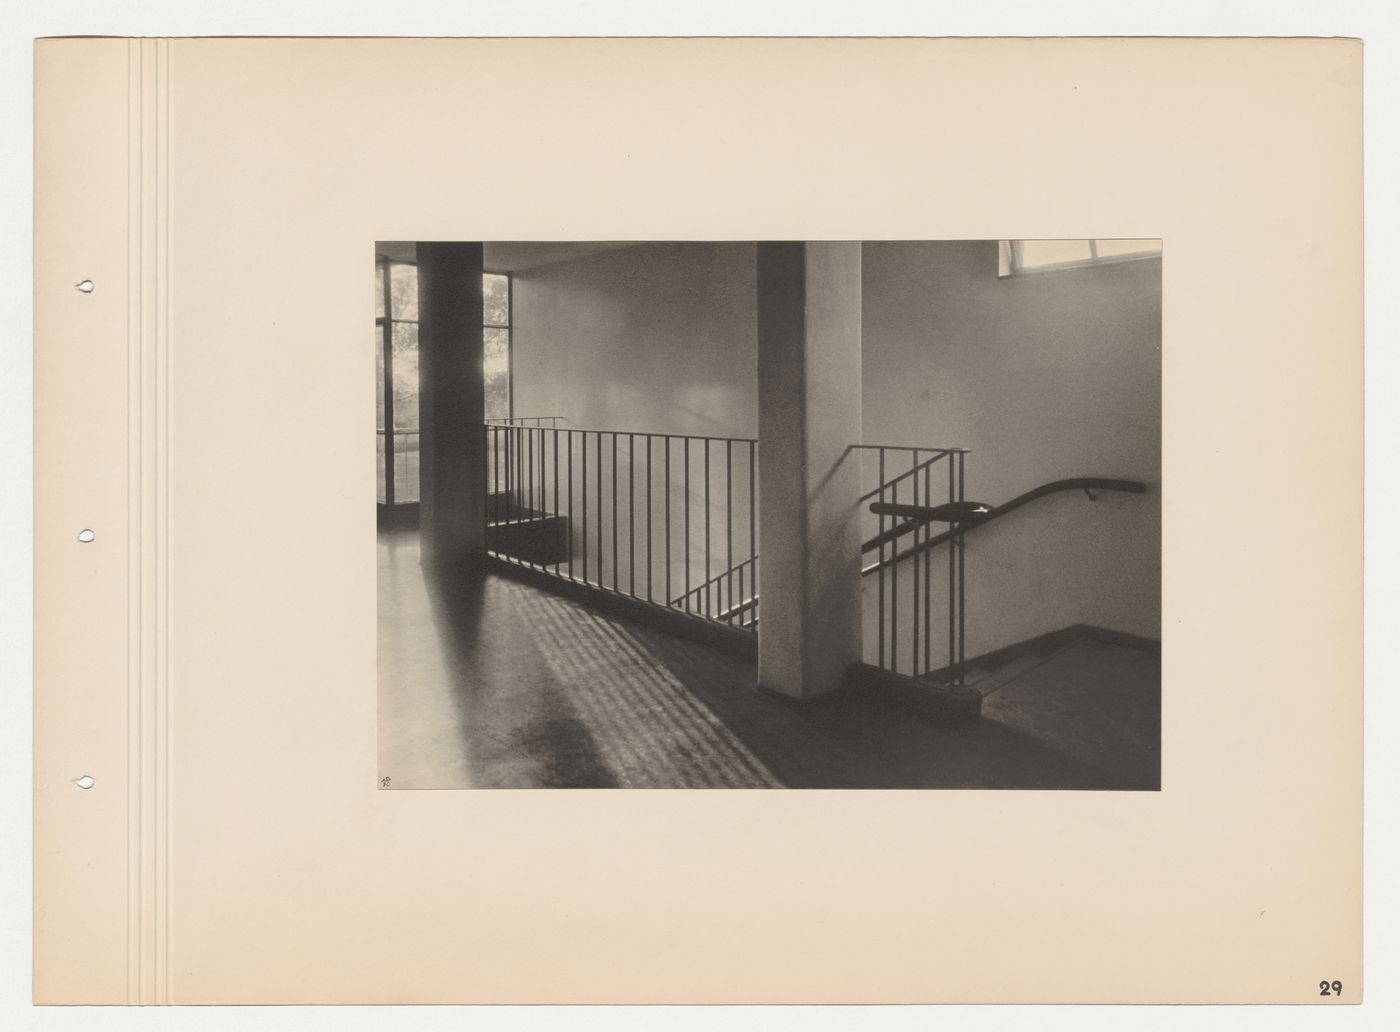 Interior view of a stairwell in the south wing of the Budge Foundation Old People's Home, Frankfurt am Main, Germany